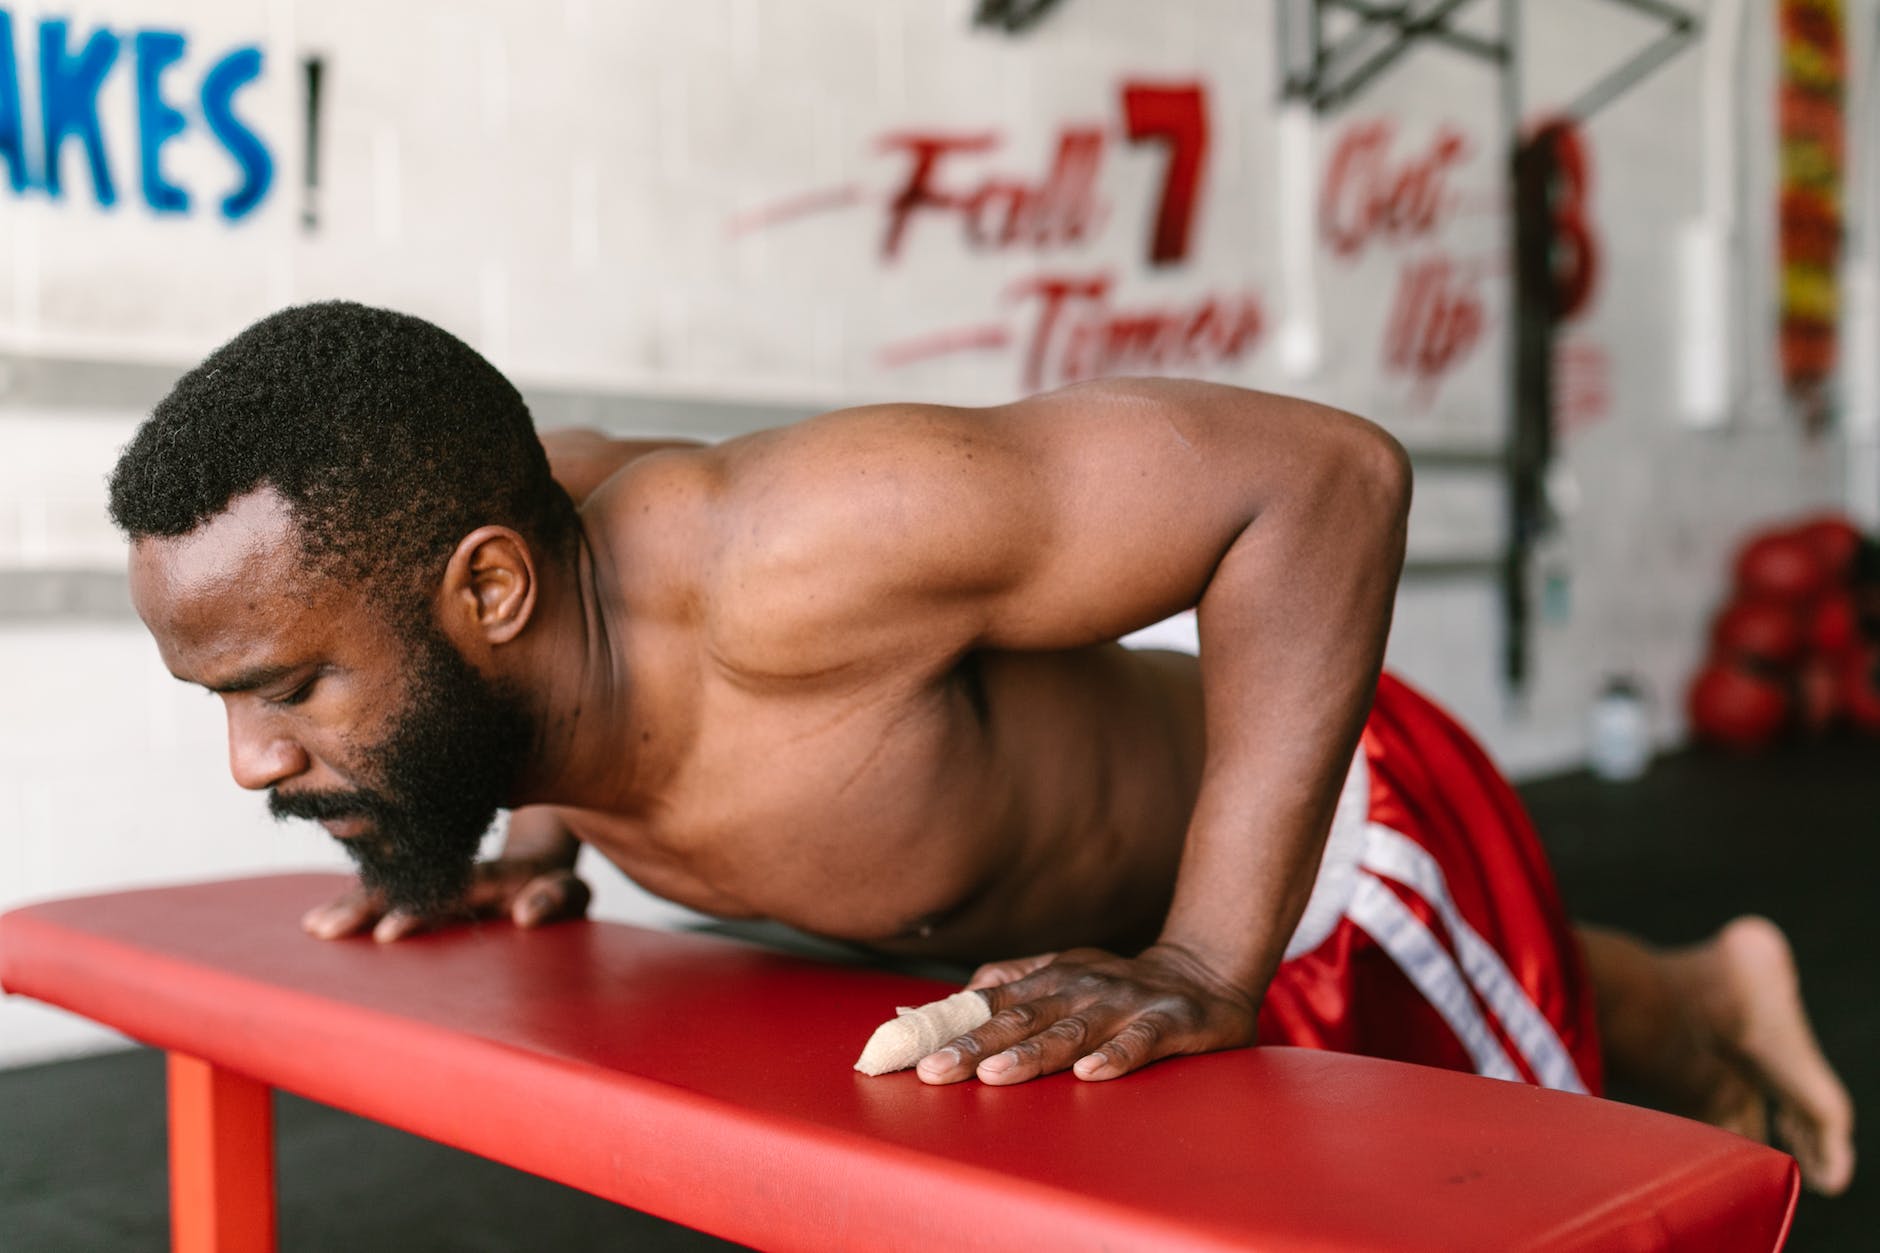 close up shot of a man doing push ups on a red bench